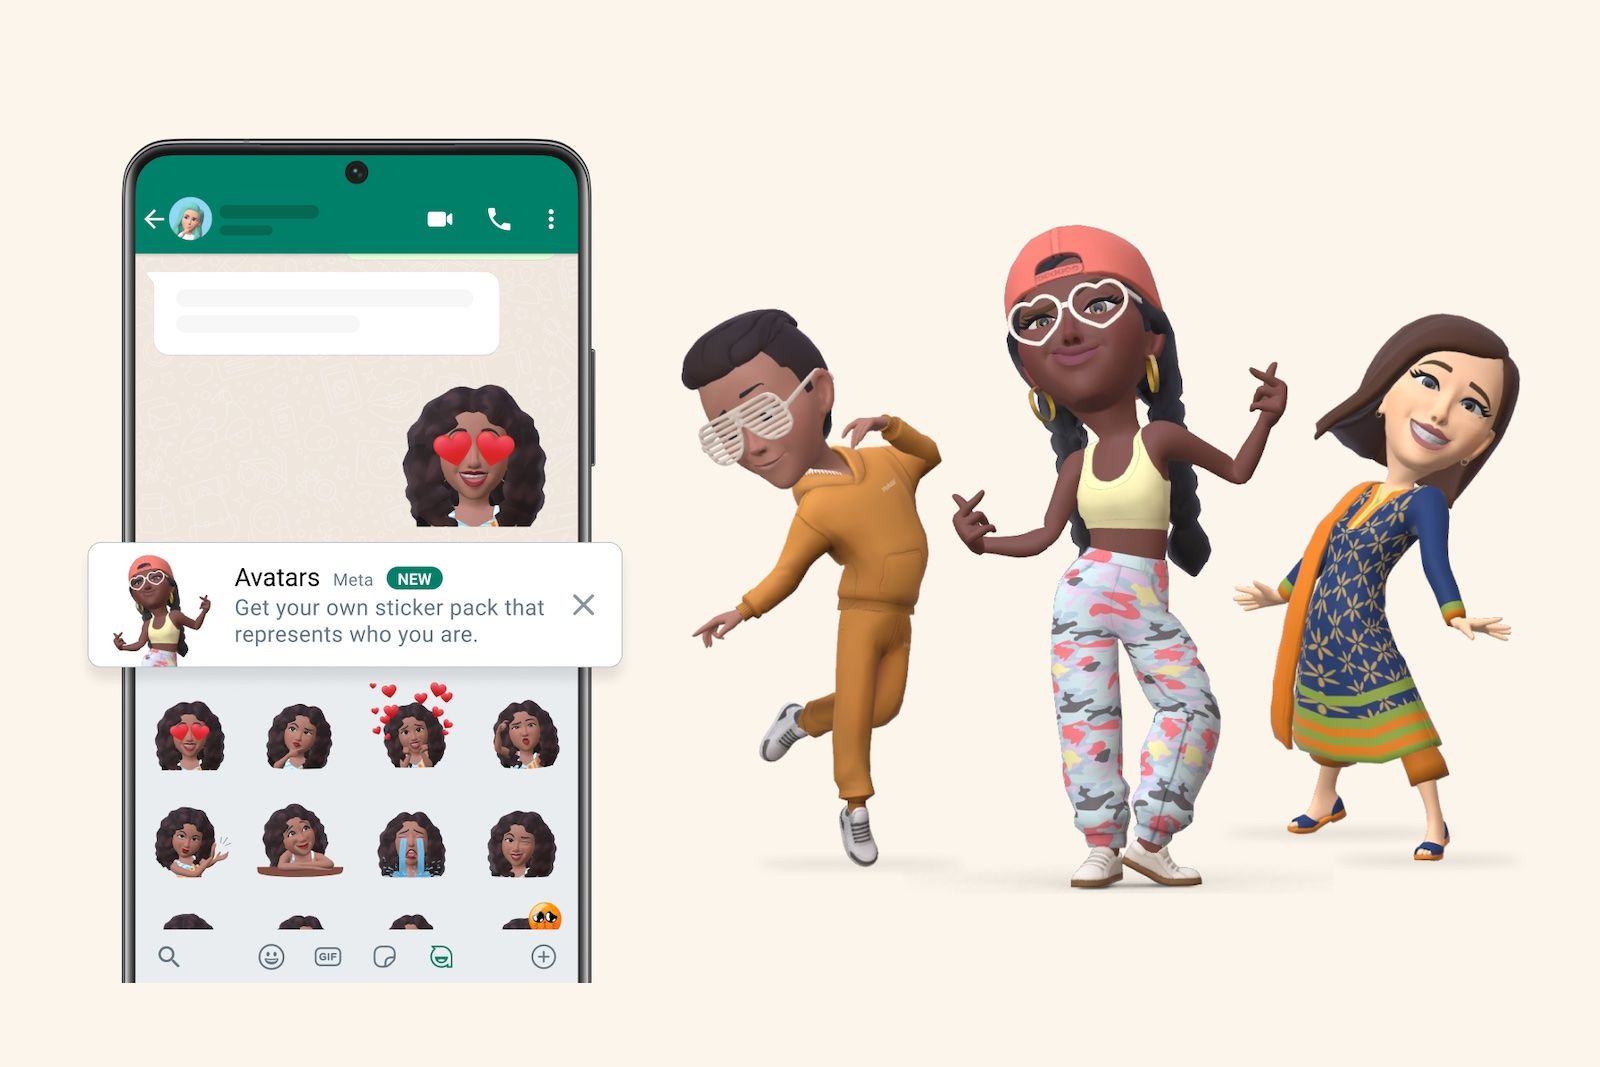 Meta's avatars roll out on WhatsApp with 36 custom stickers photo 1